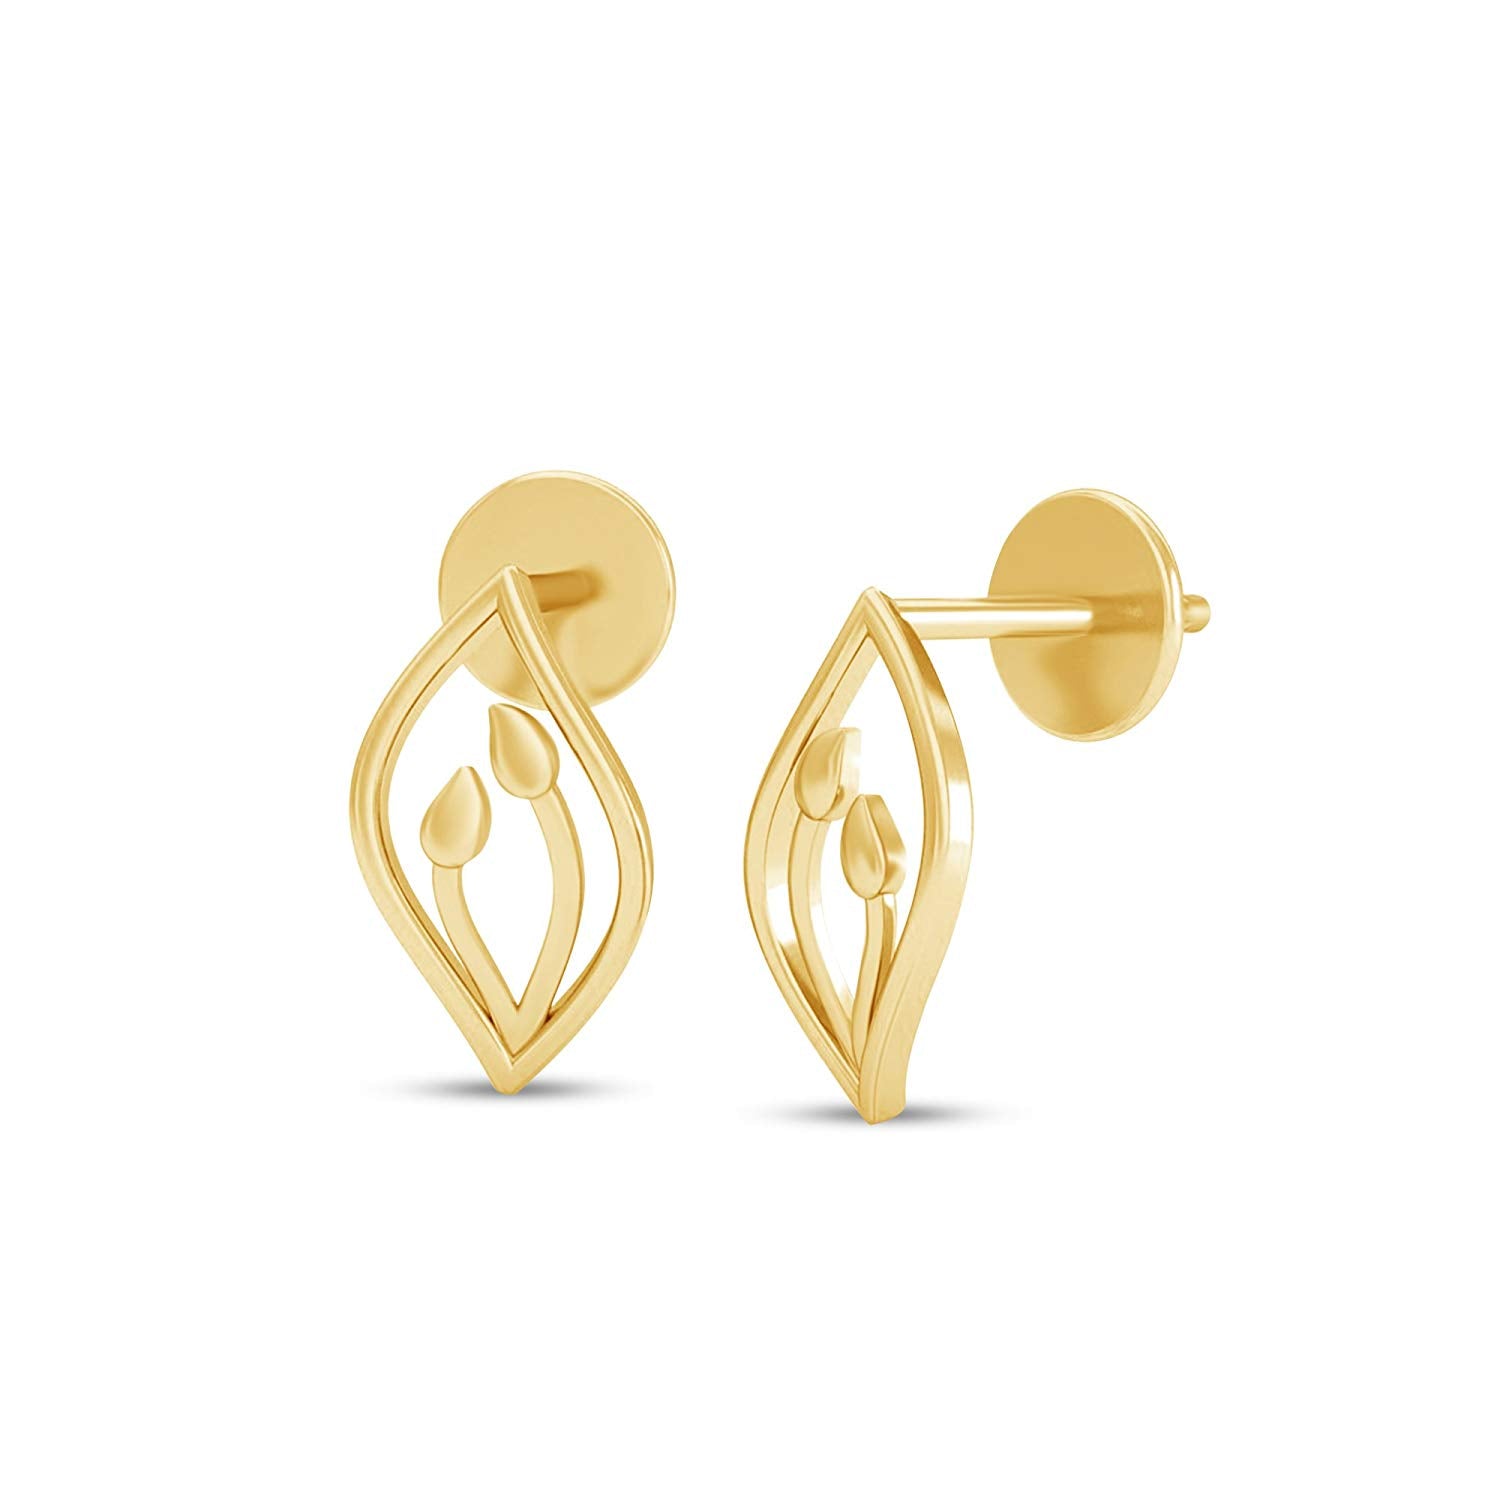 Gold Hoop Earrings Designs  V Shap bali  Latest Gold earrings with  Price  YouTube